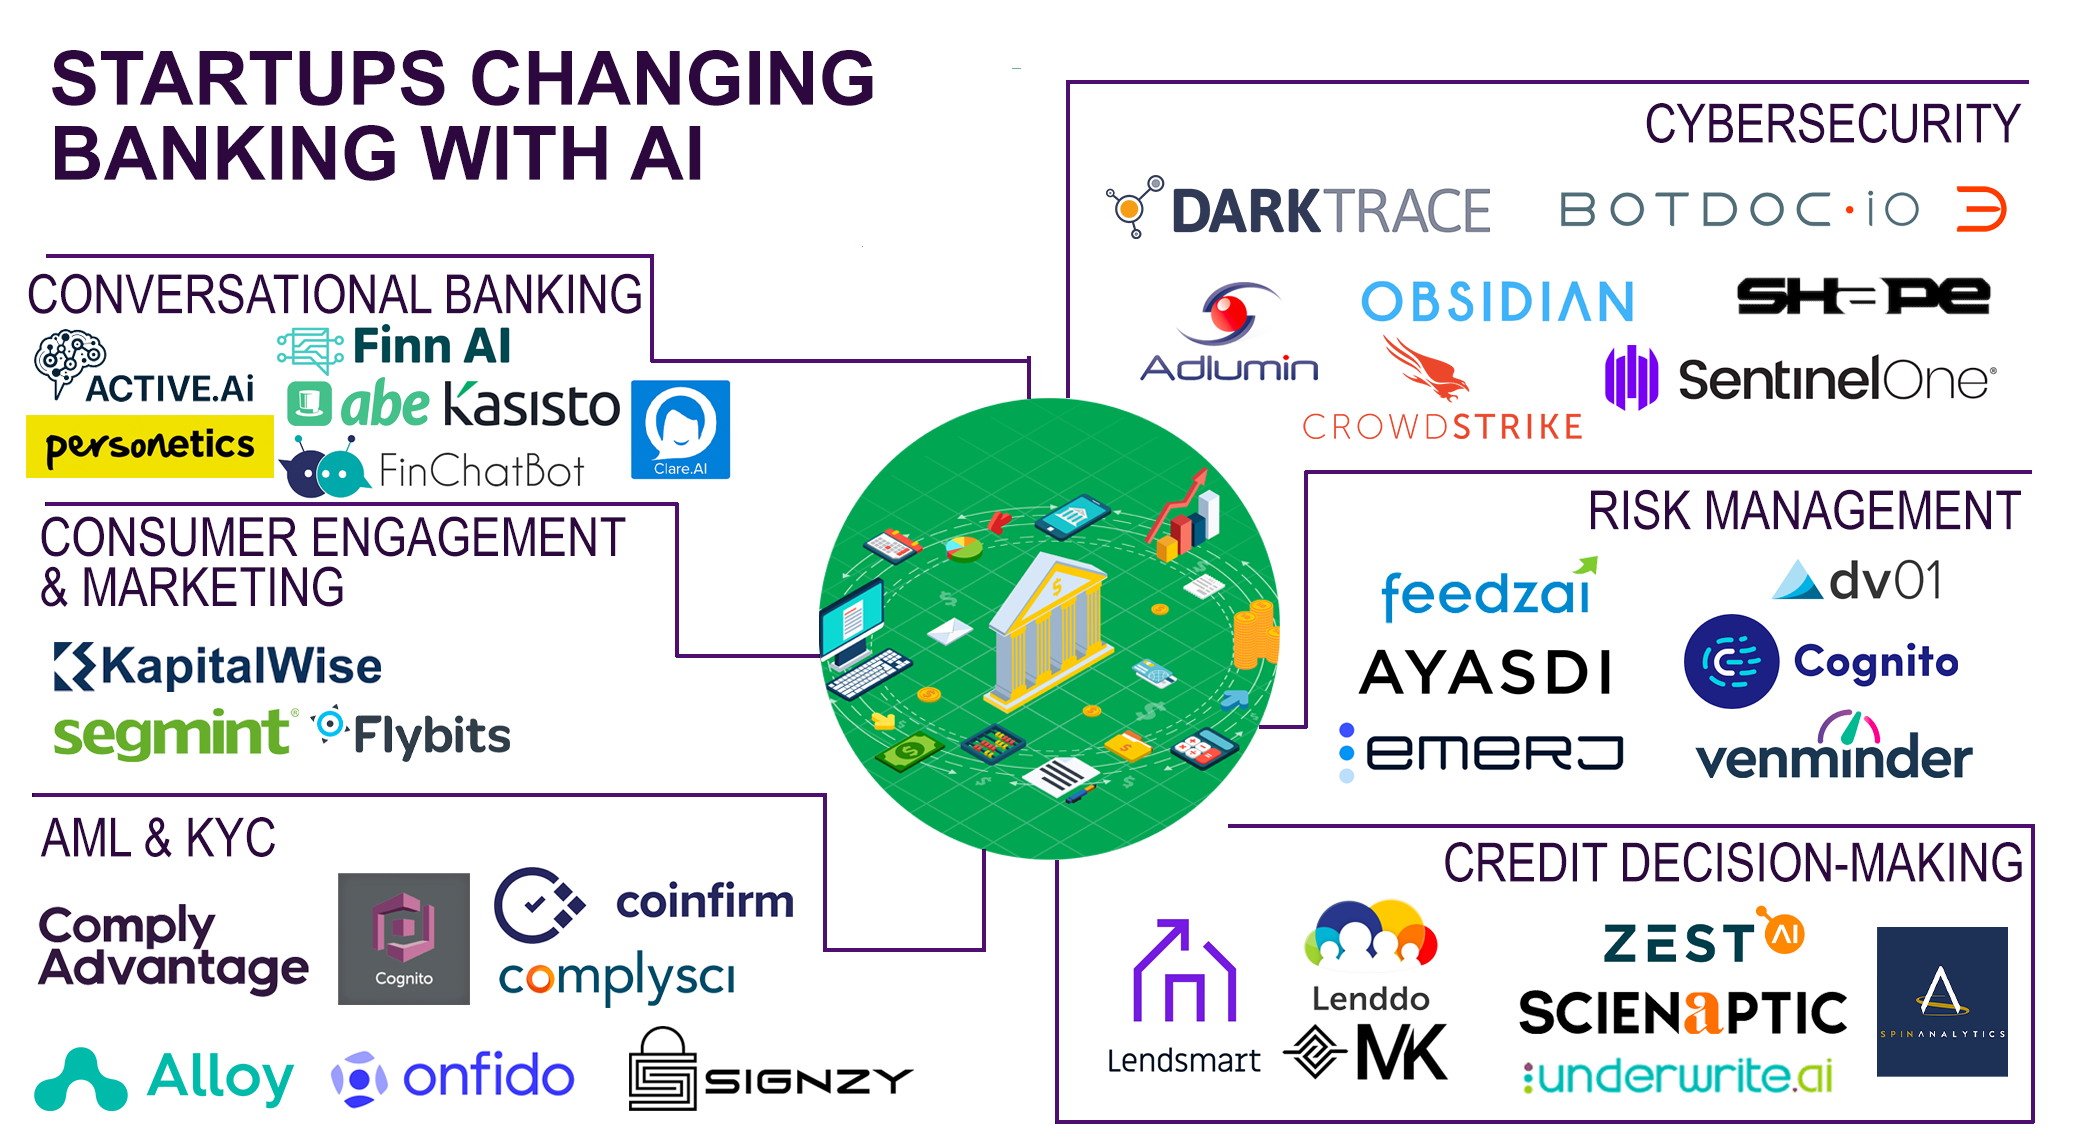 These startups are changing banking with AI